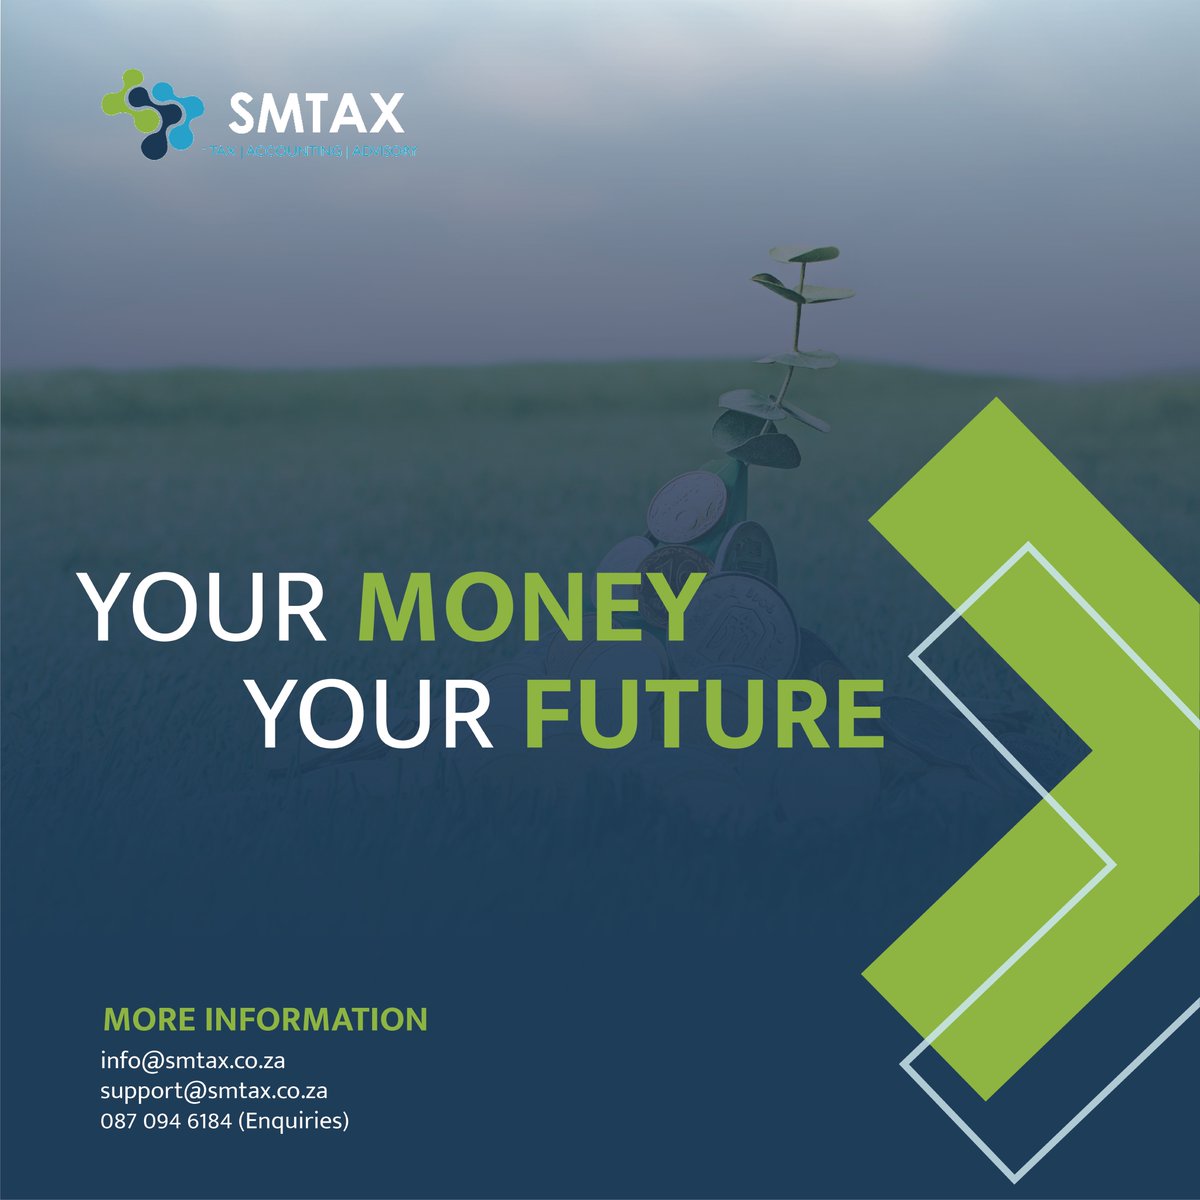 Empowering dreams, one business at a time.

smtax.co.za

Need assistance? Email us at support@smtax.co.za or call 087 094 6184 for enquiries.

#xero #accountingsolution #smallbusiness #smallbusinessfinance #accounting #smallbusinessowner #businessopportunities